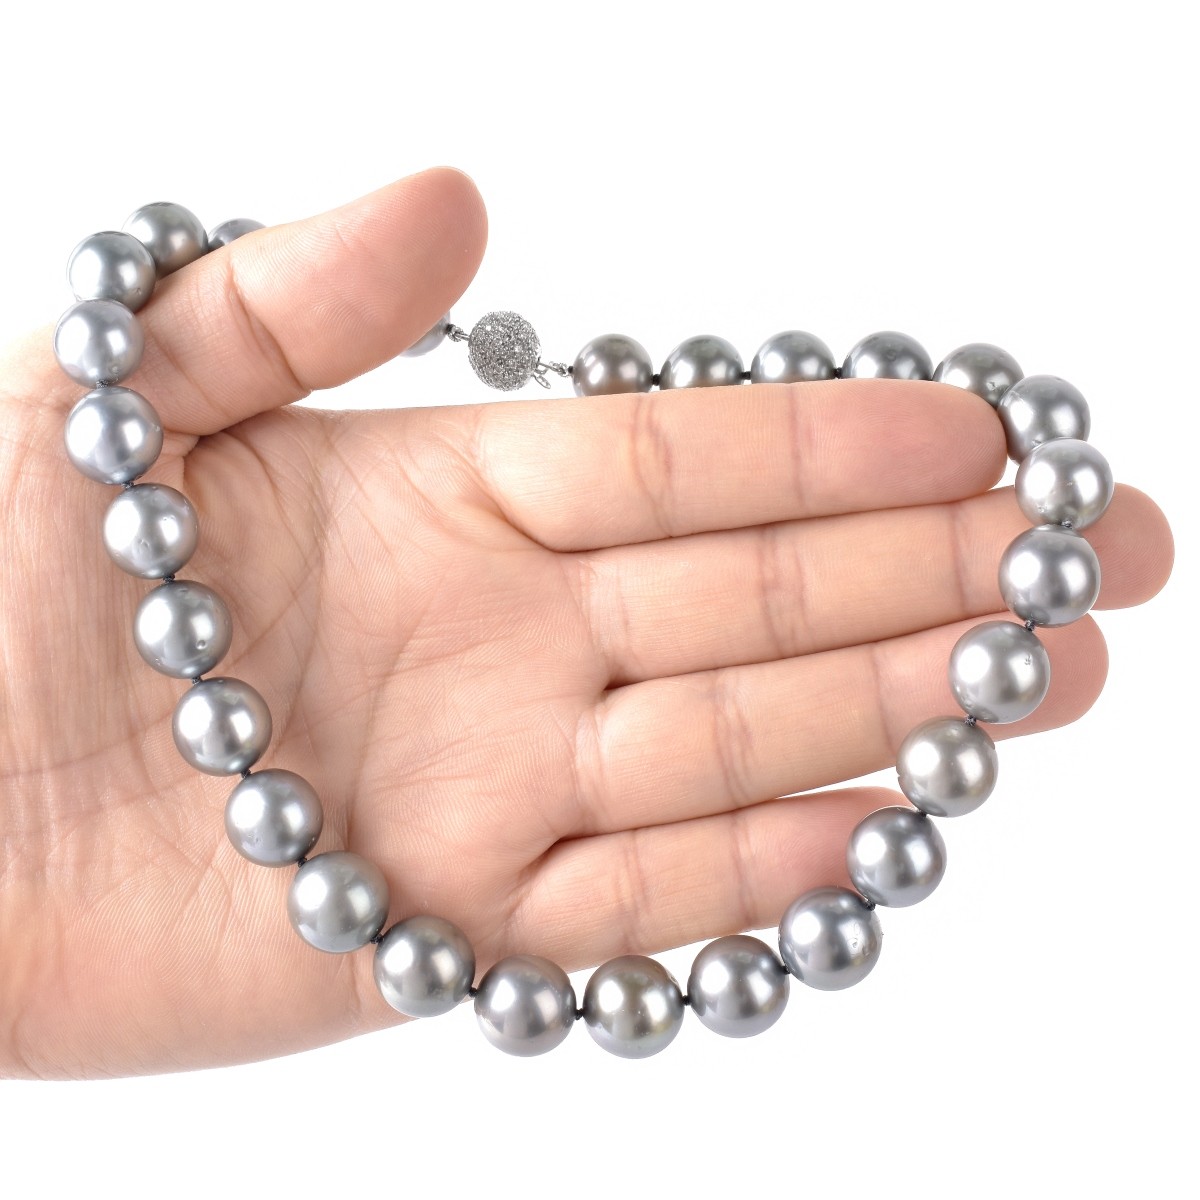 11.5-14.0mm Tahitian Gray Pearl Necklace